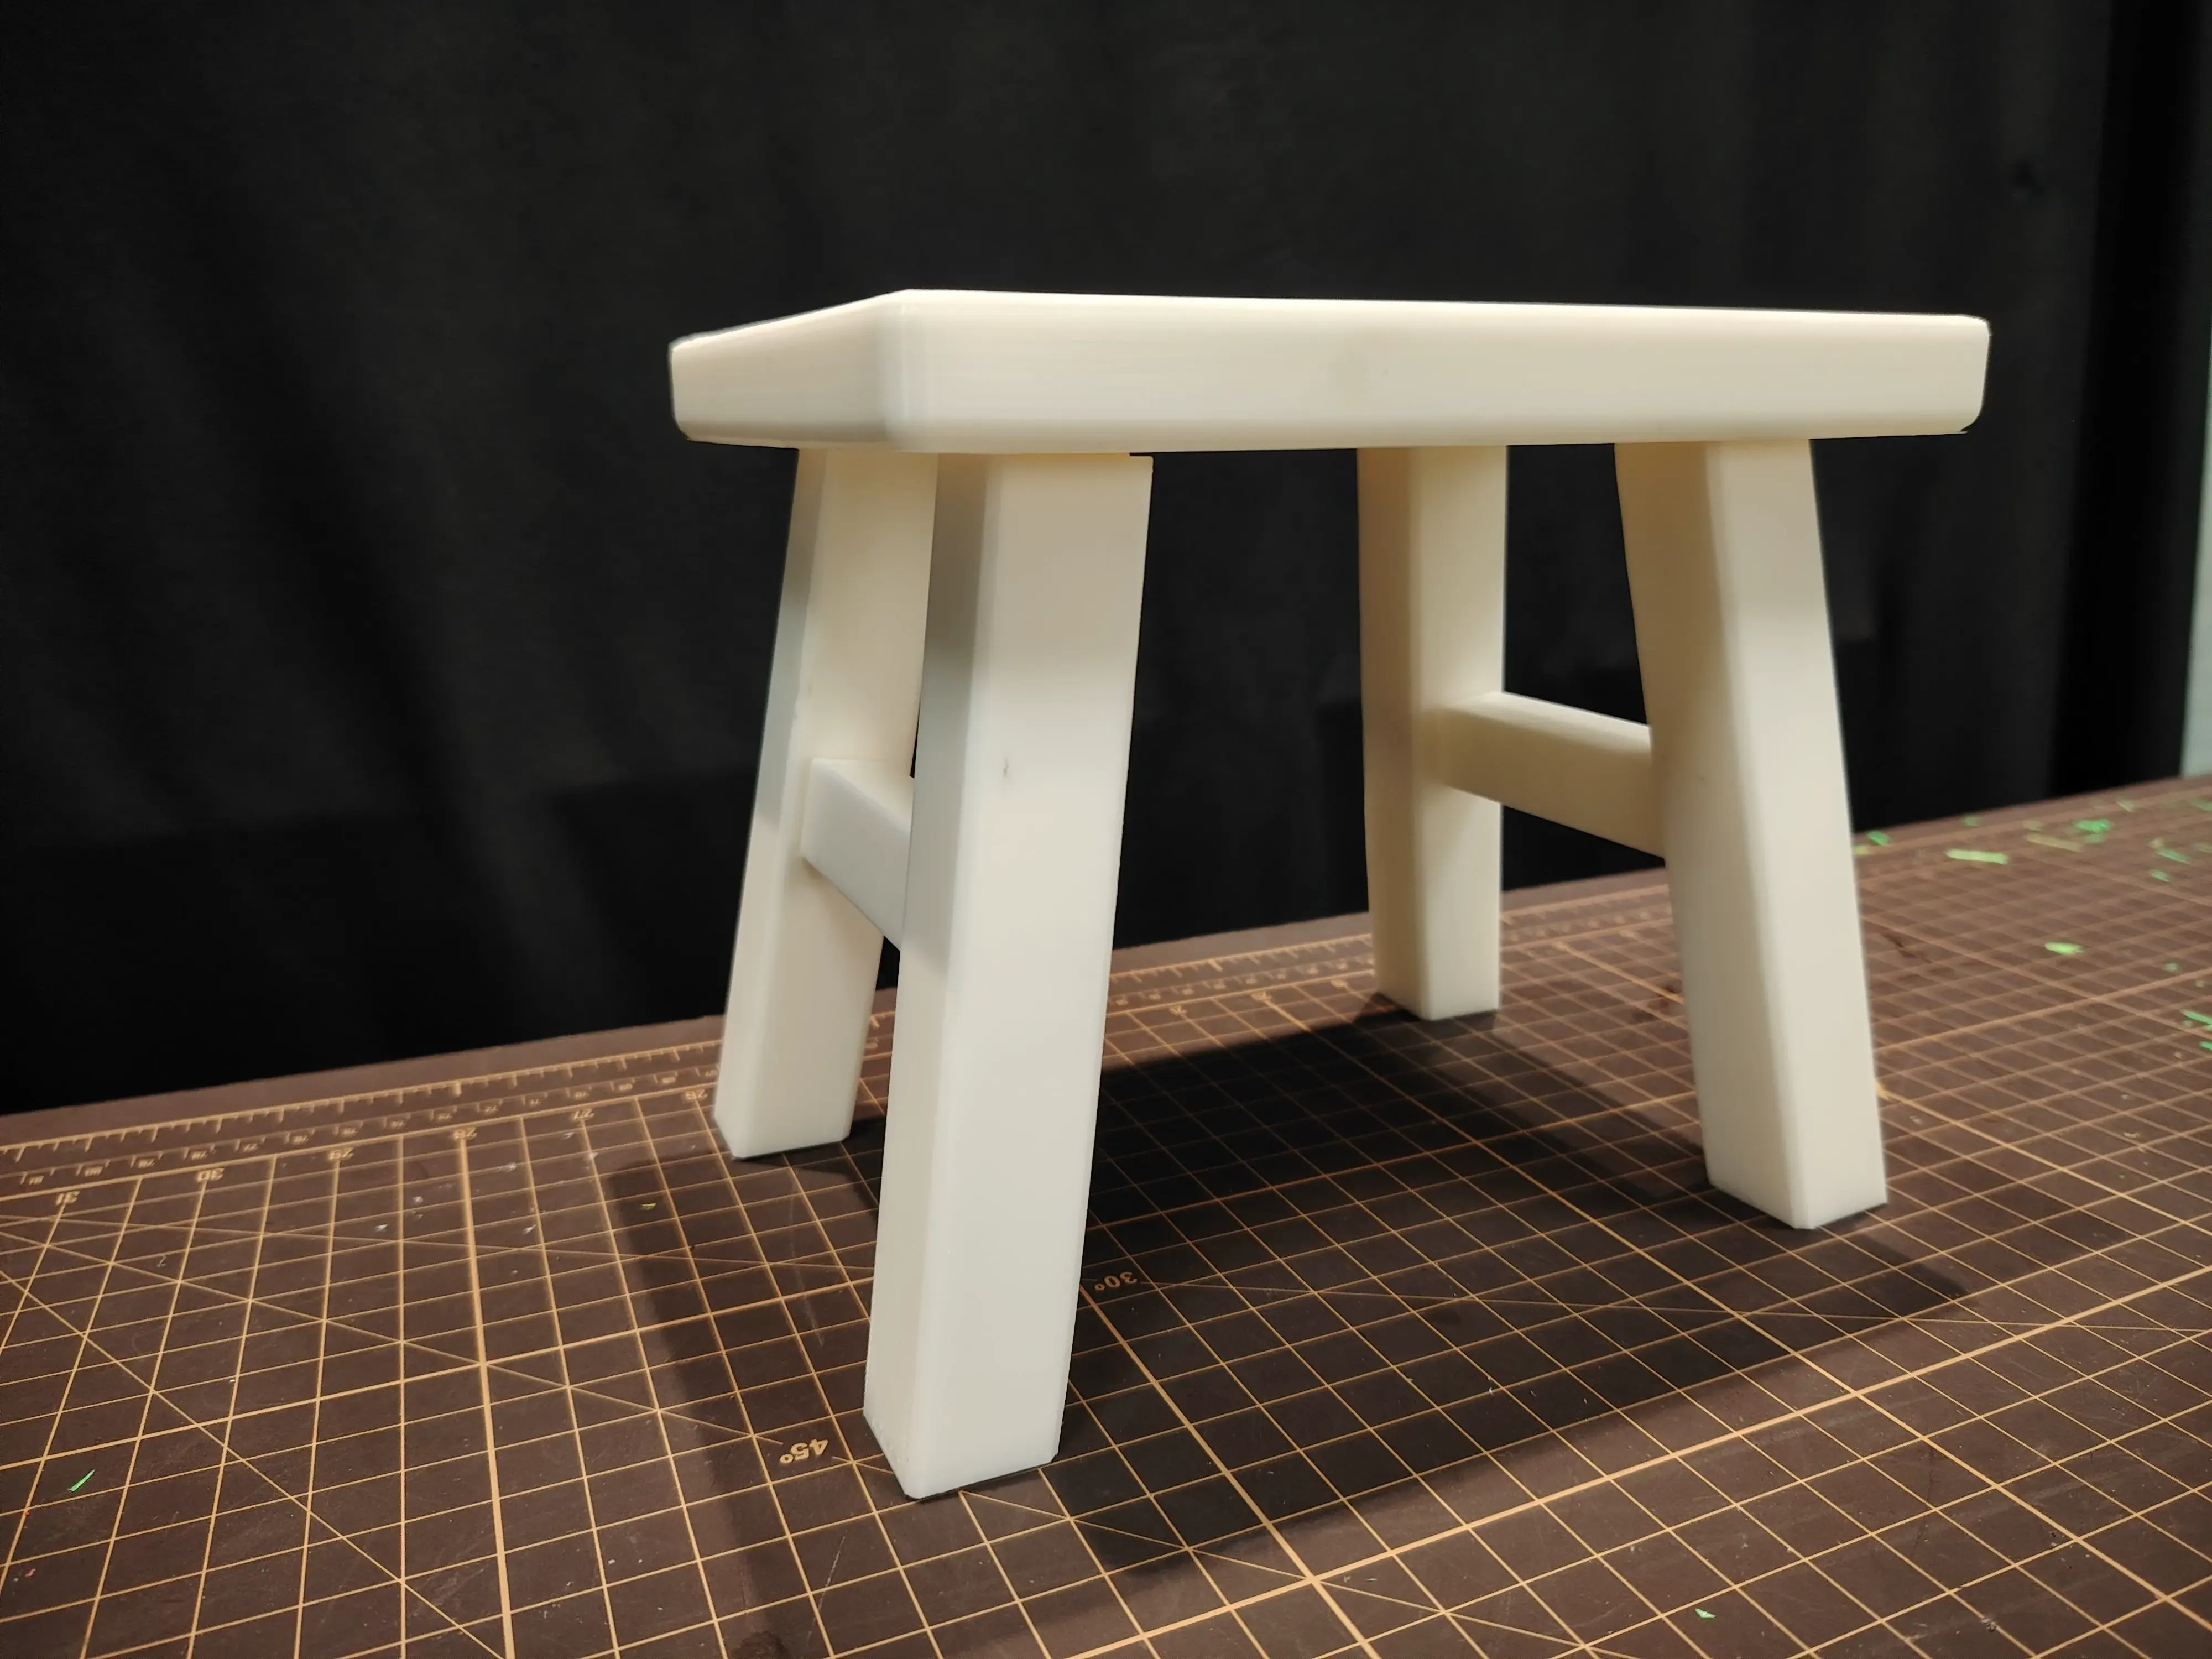 Functional and practical stool